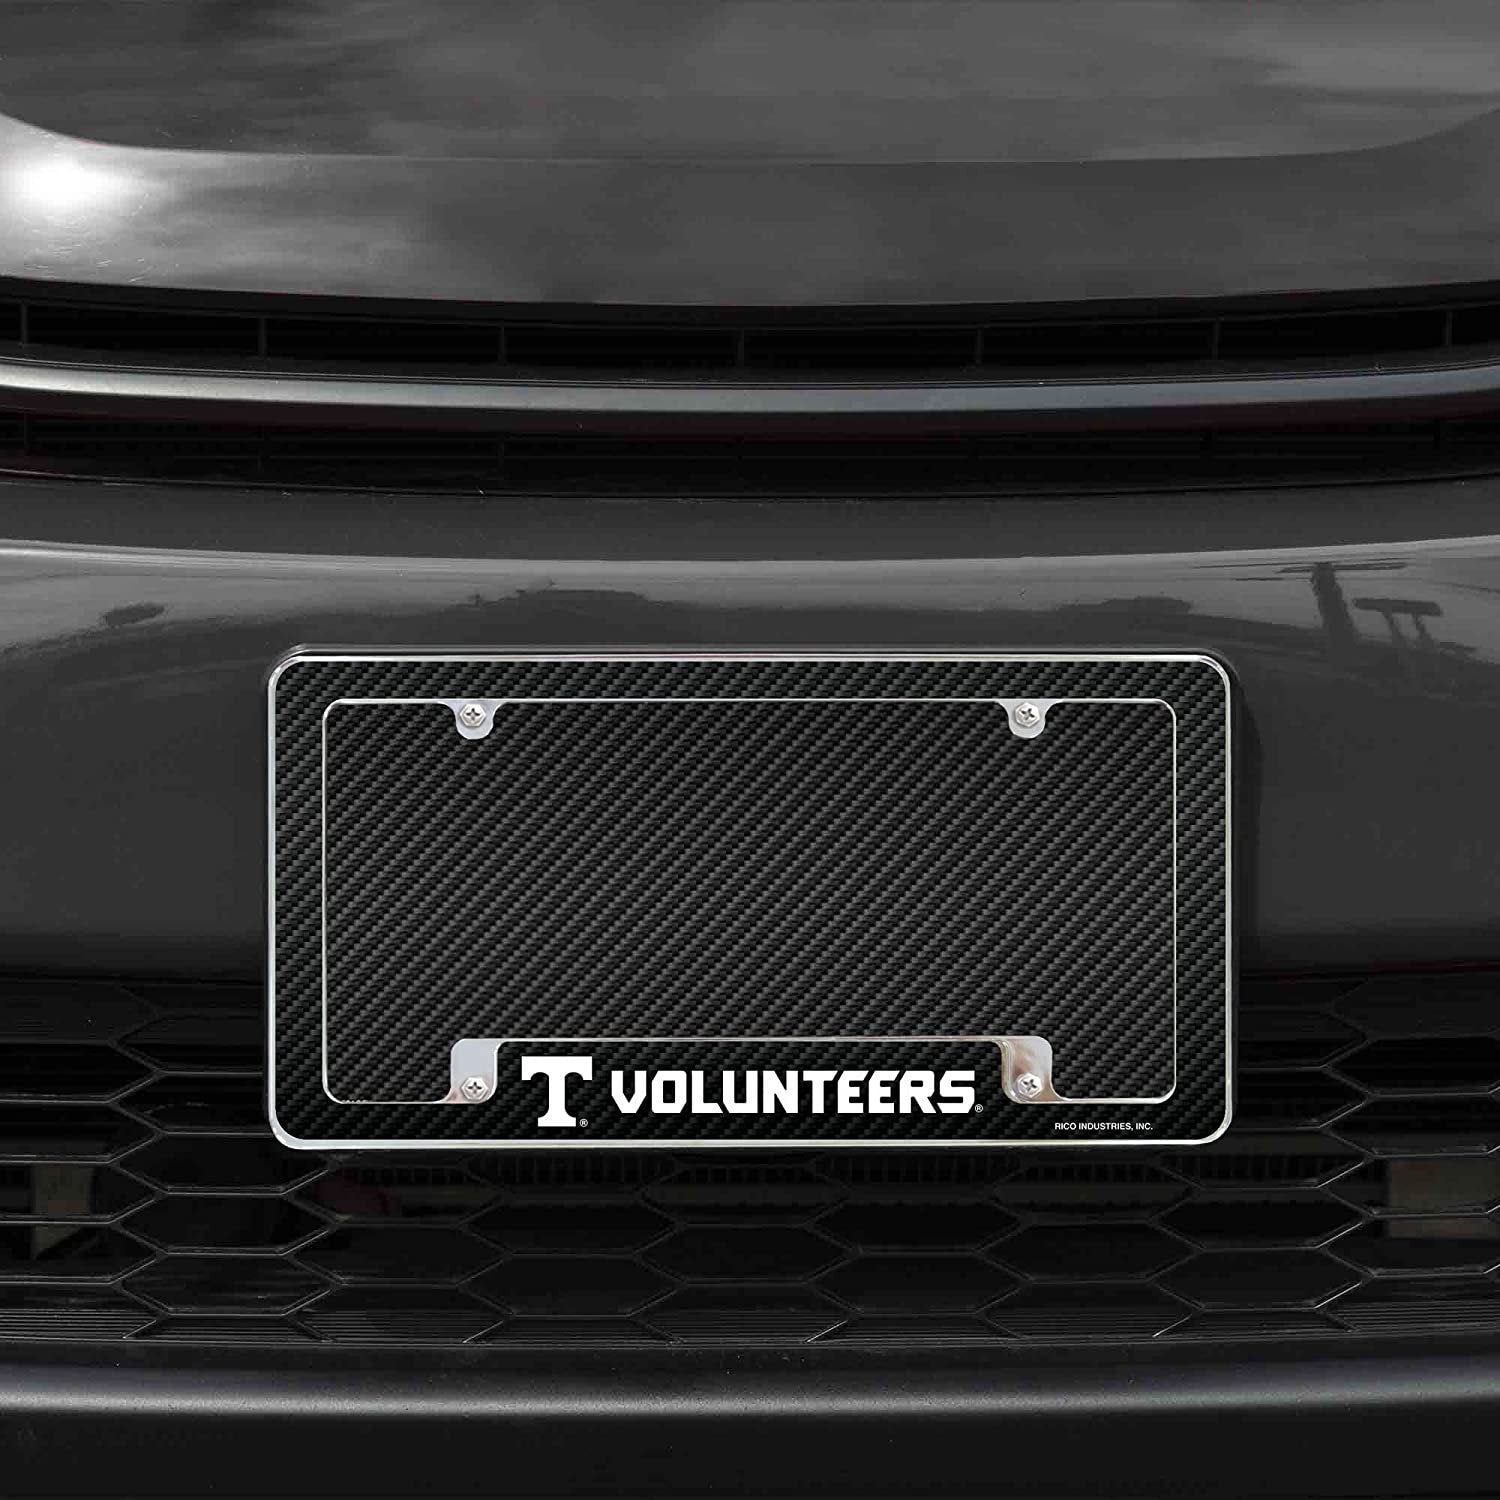 University of Tennessee Volunteers Metal License Plate Frame Chrome Tag Cover Carbon Fiber Design 6x12 Inch